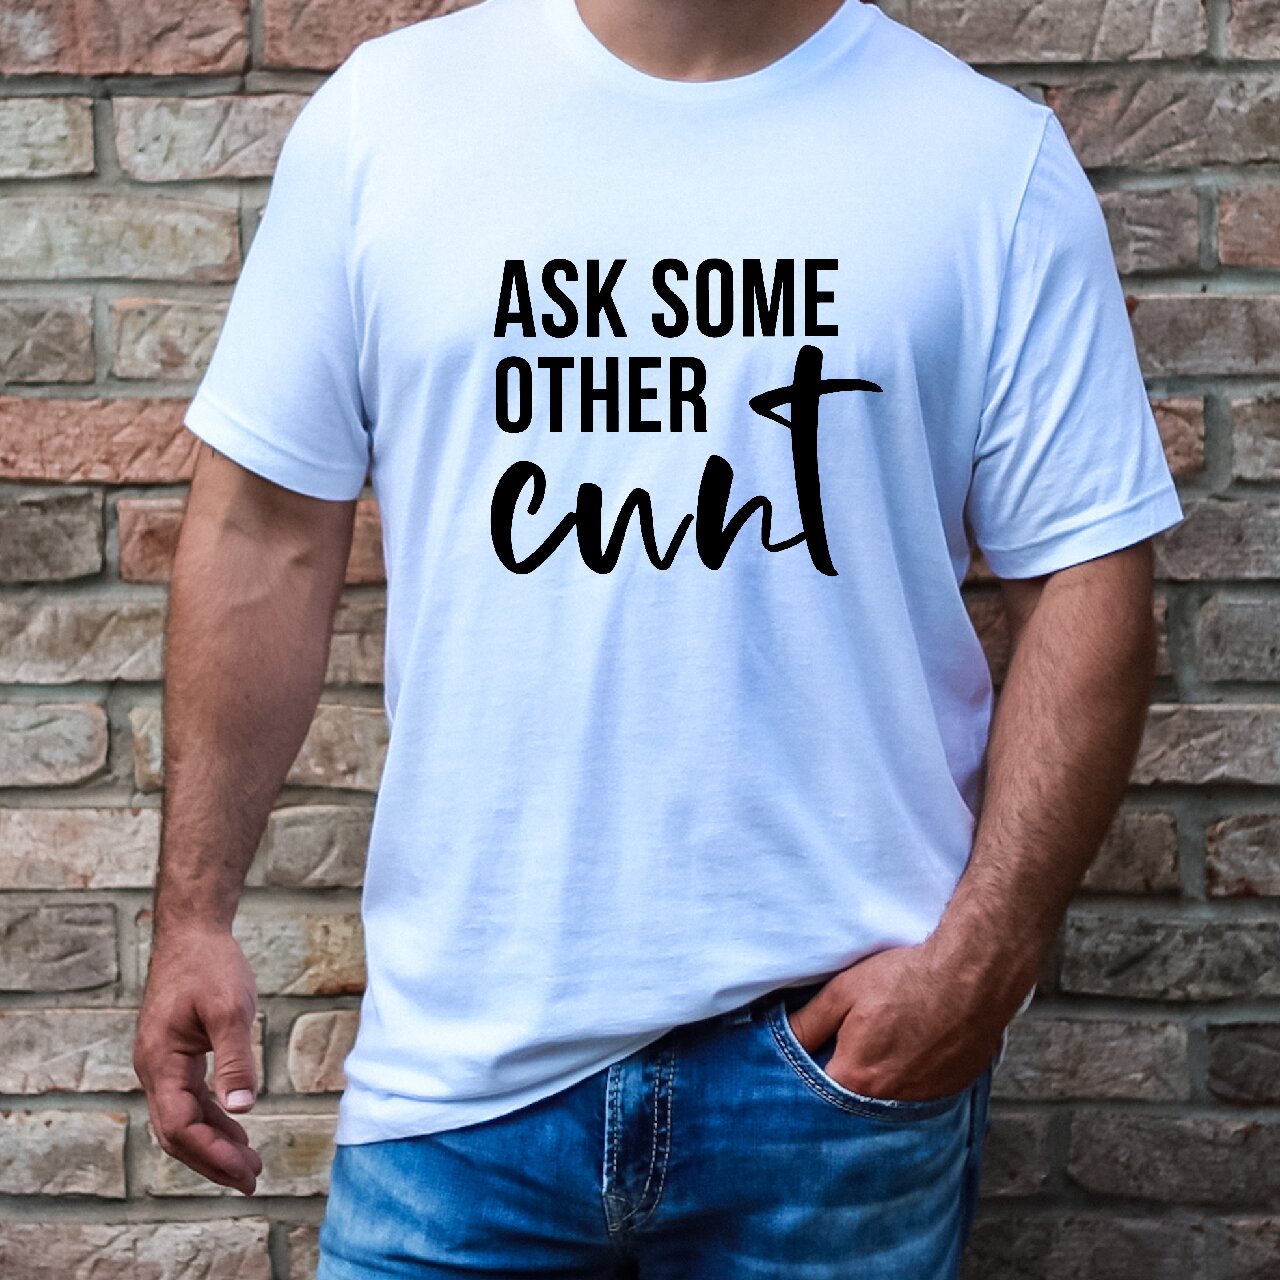 Ask Some Other Cunt - T-Shirt